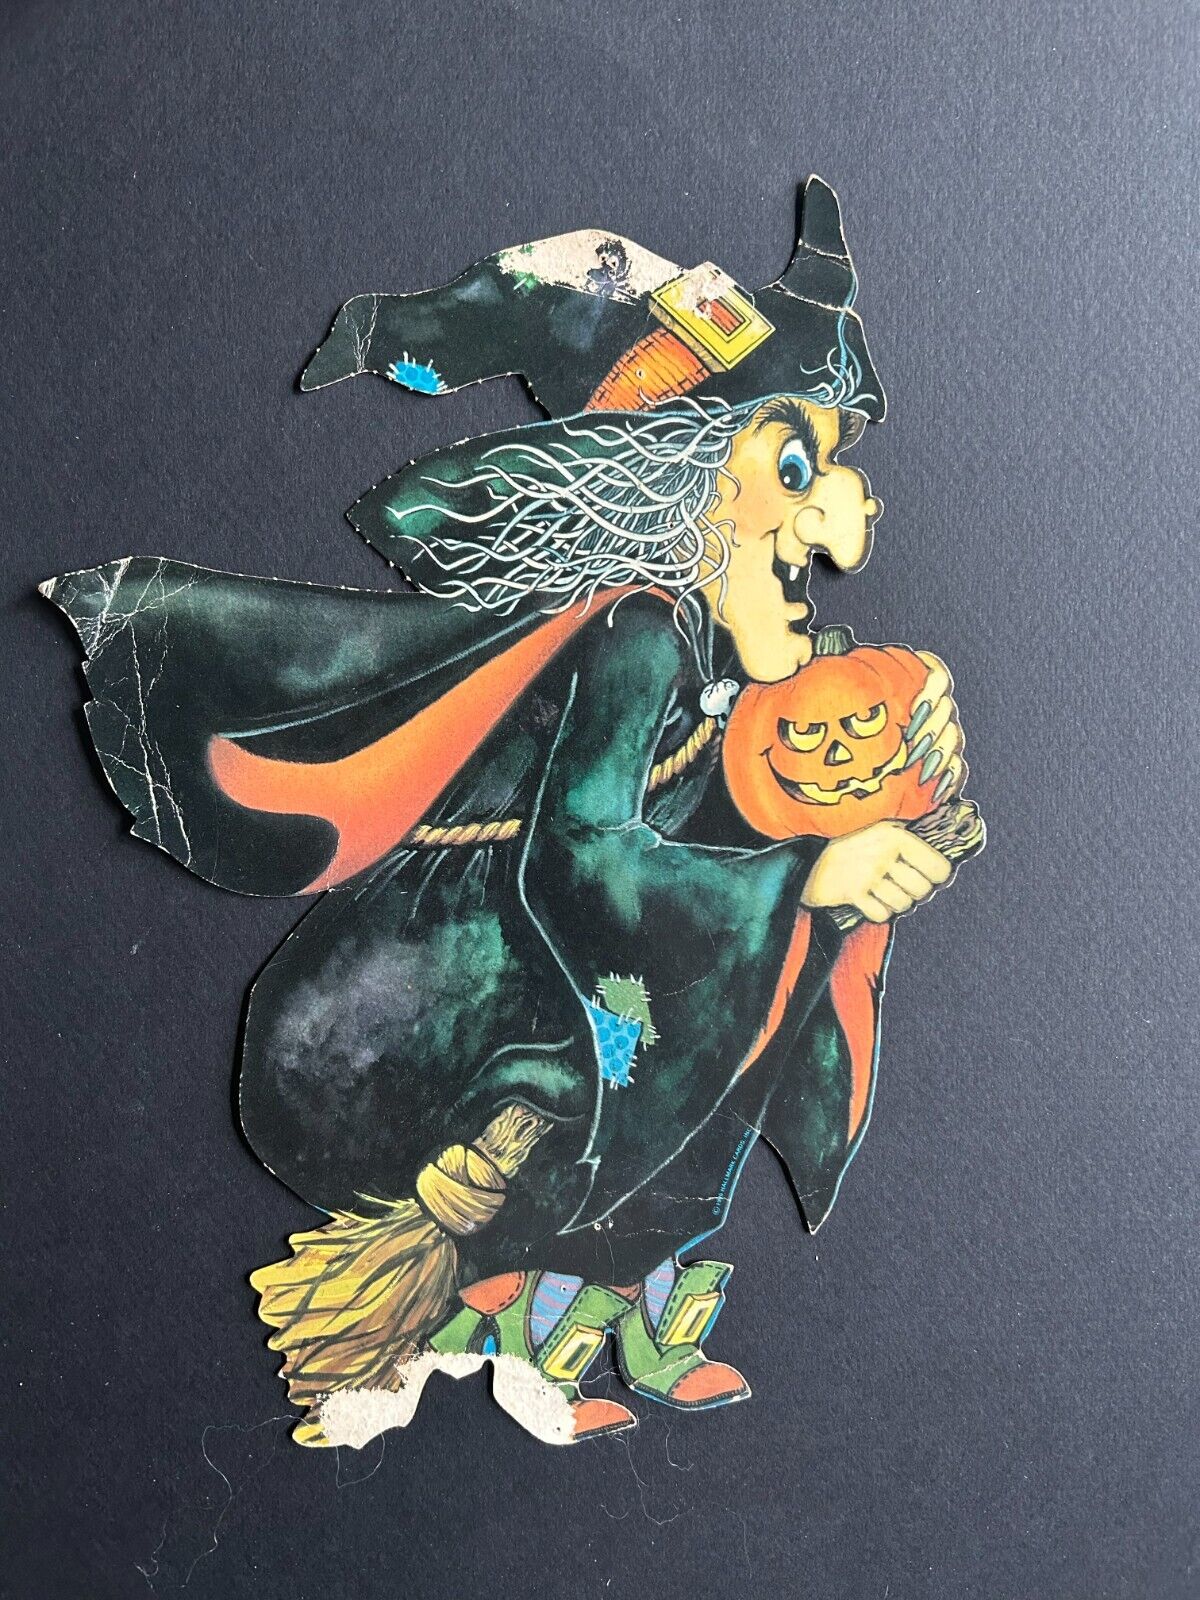 Vintage Halloween Decoration: Witch on a Broom Holding a Jack-o-Latern